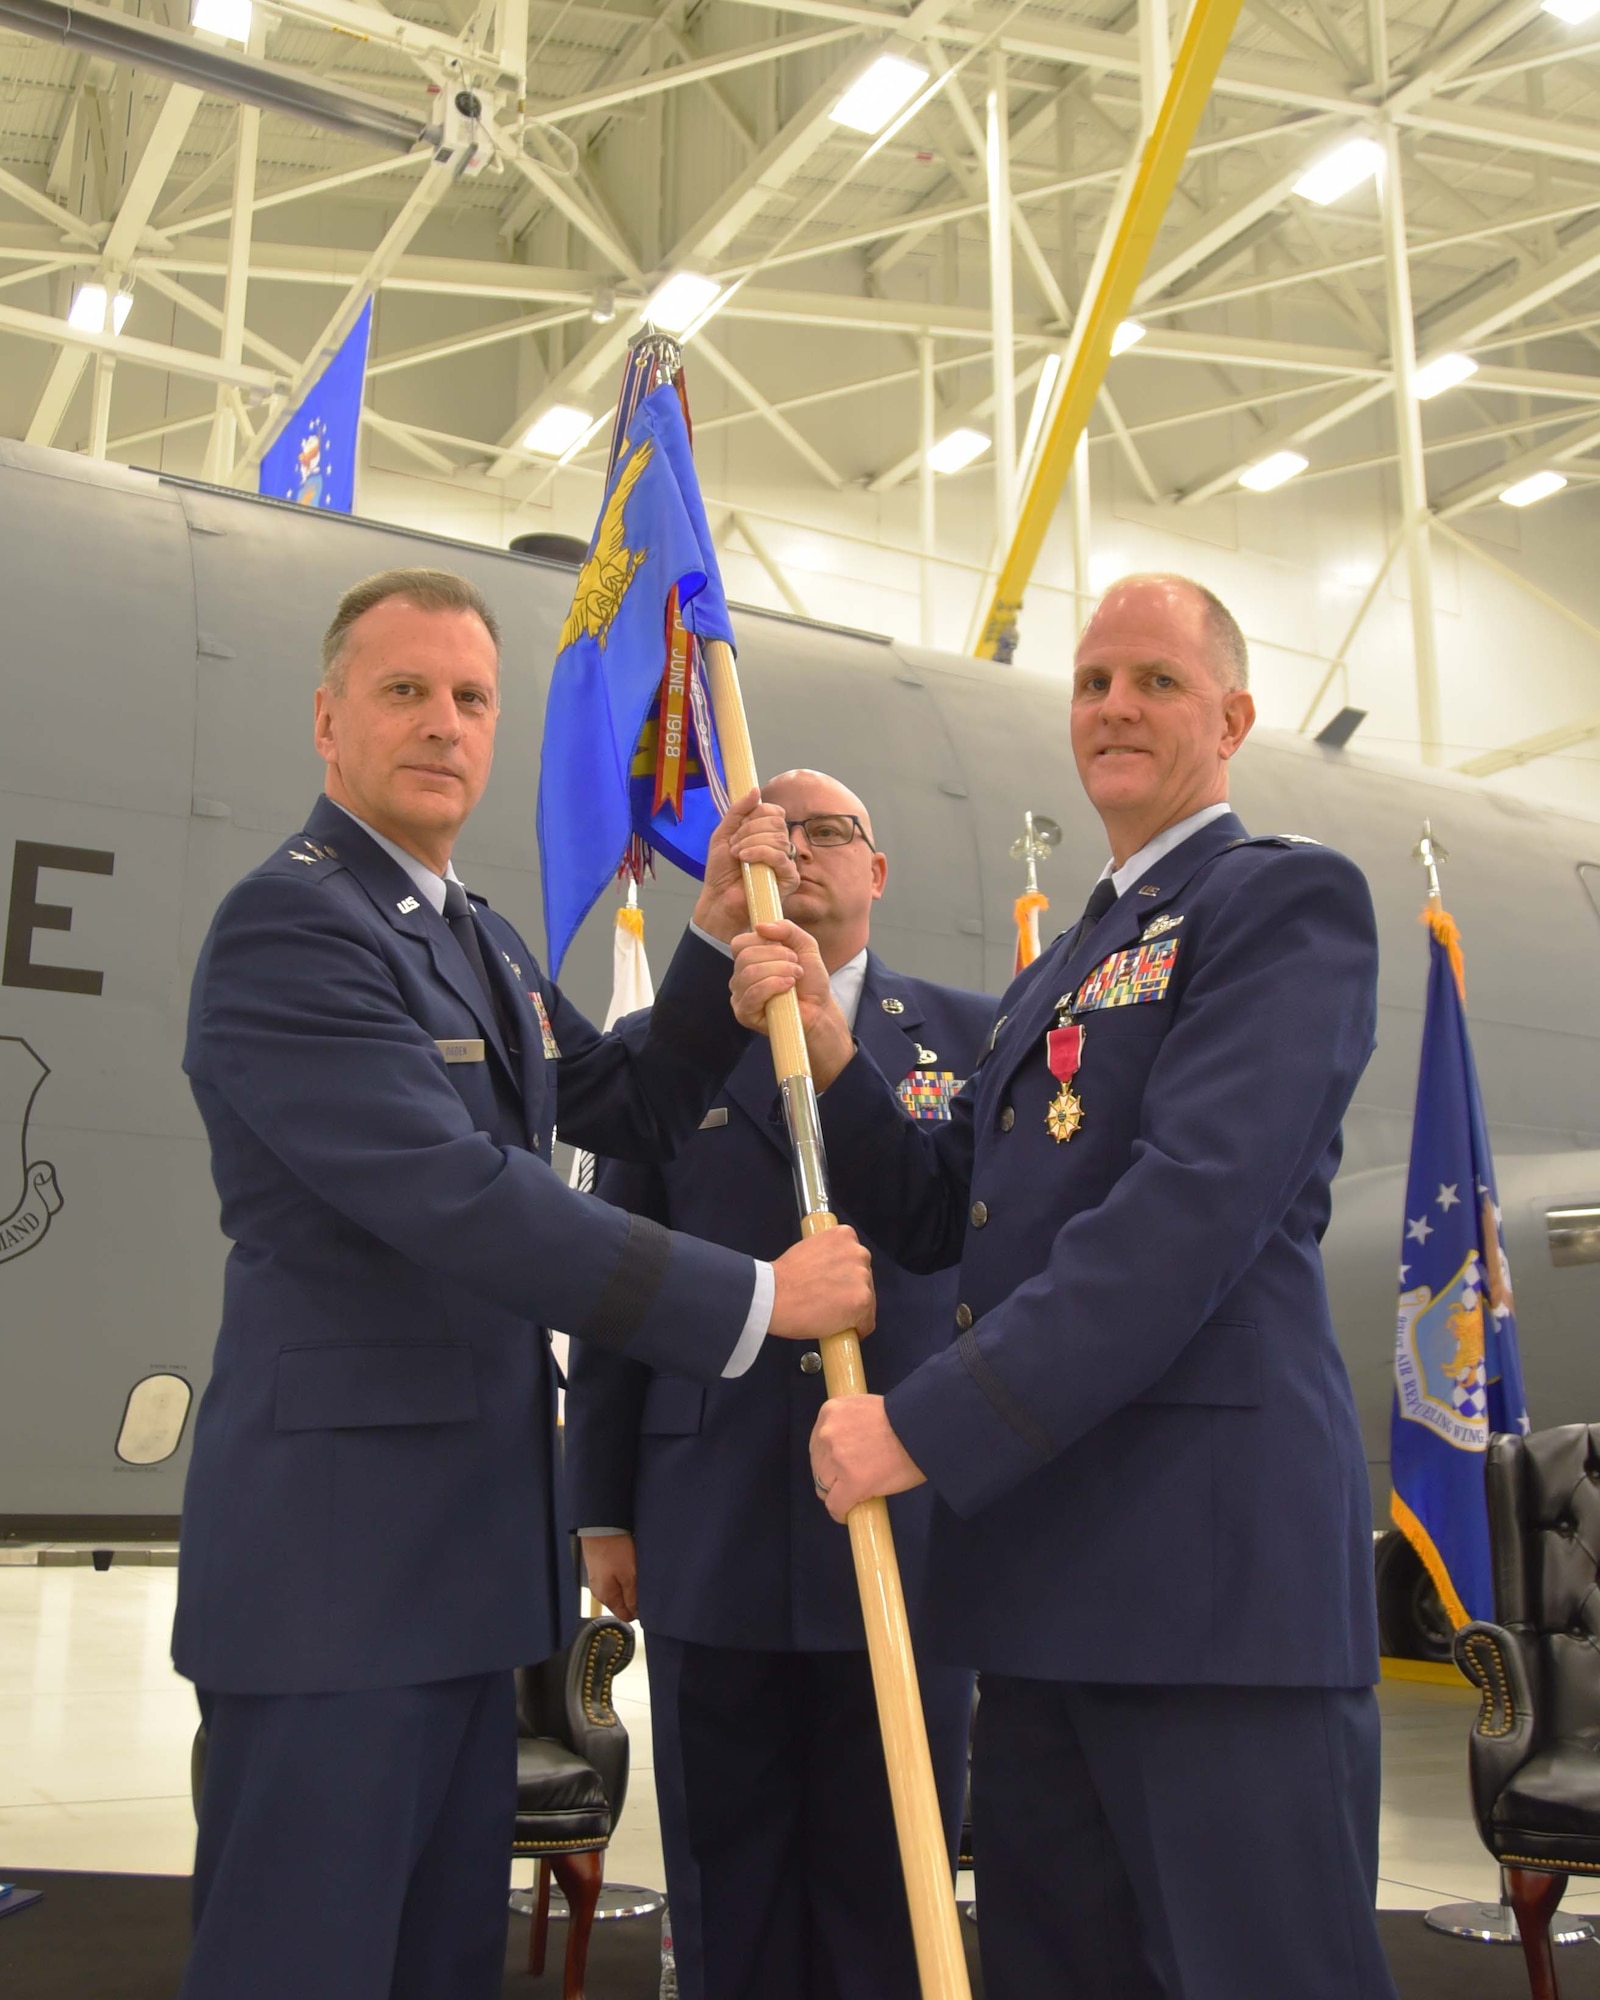 Maj. Gen. Randall A. Ogden, 4th Air Force commander, takes the guidon from Col. Eric Vitosh, outgoing 931st Air Refueling Wing commander, during a change of command ceremony Dec. 1, 2018, McConnell Air Force Base, Kan.  Vitosh, a Traditional Reservist, has commanded the 931st for more than a year.  (U.S. Air Force photo by Tech. Sgt. Abigail Klein)